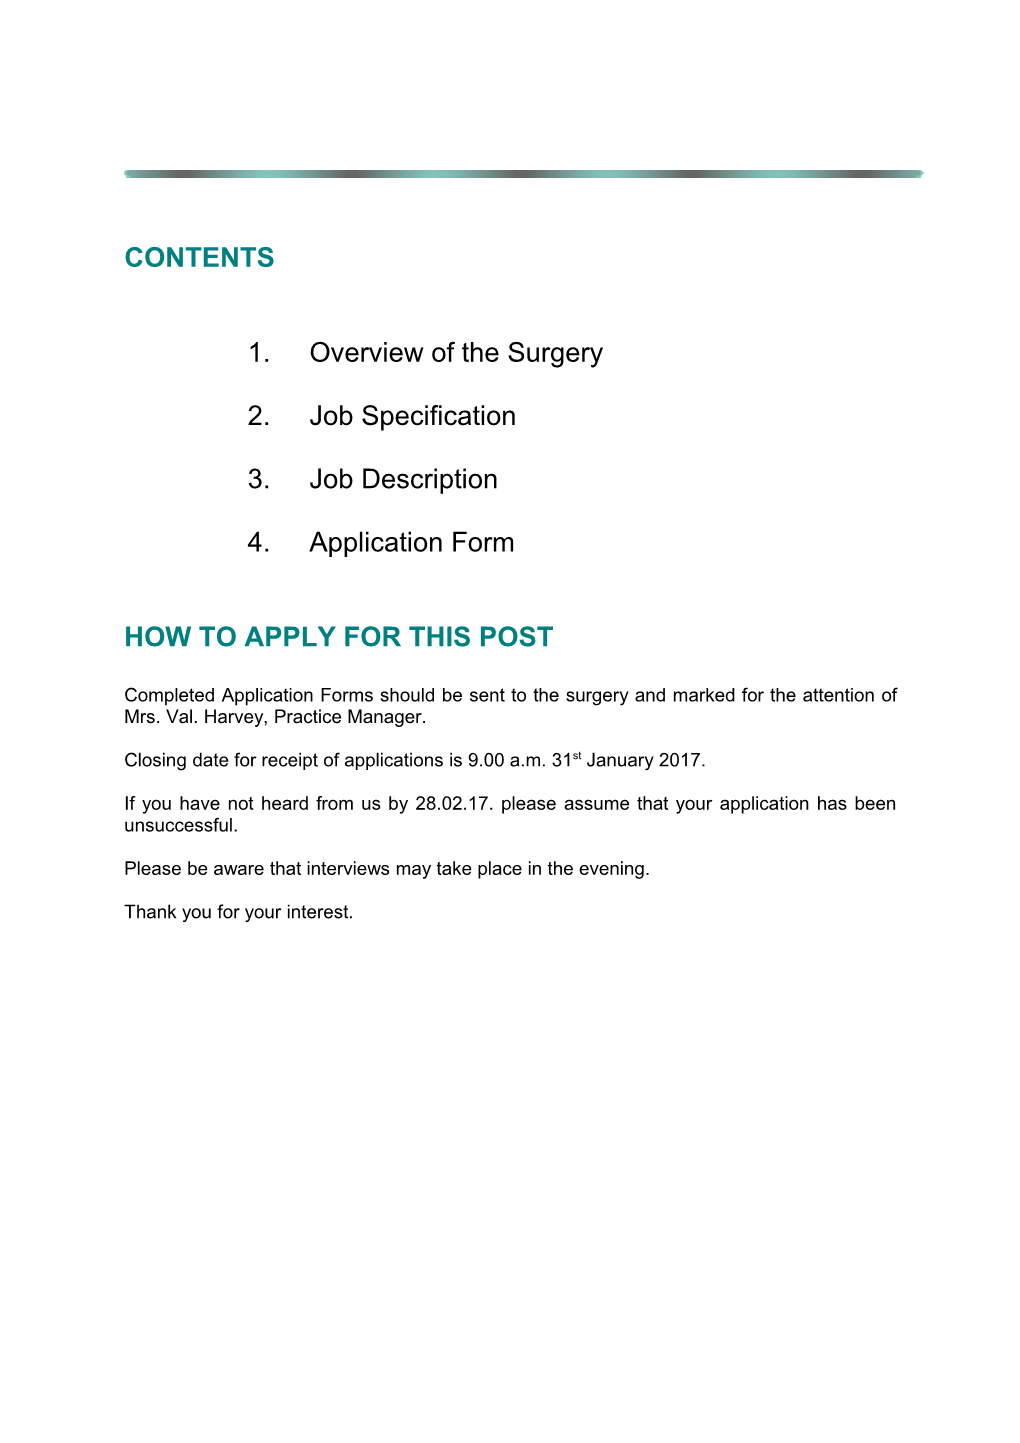 1.Overview of the Surgery